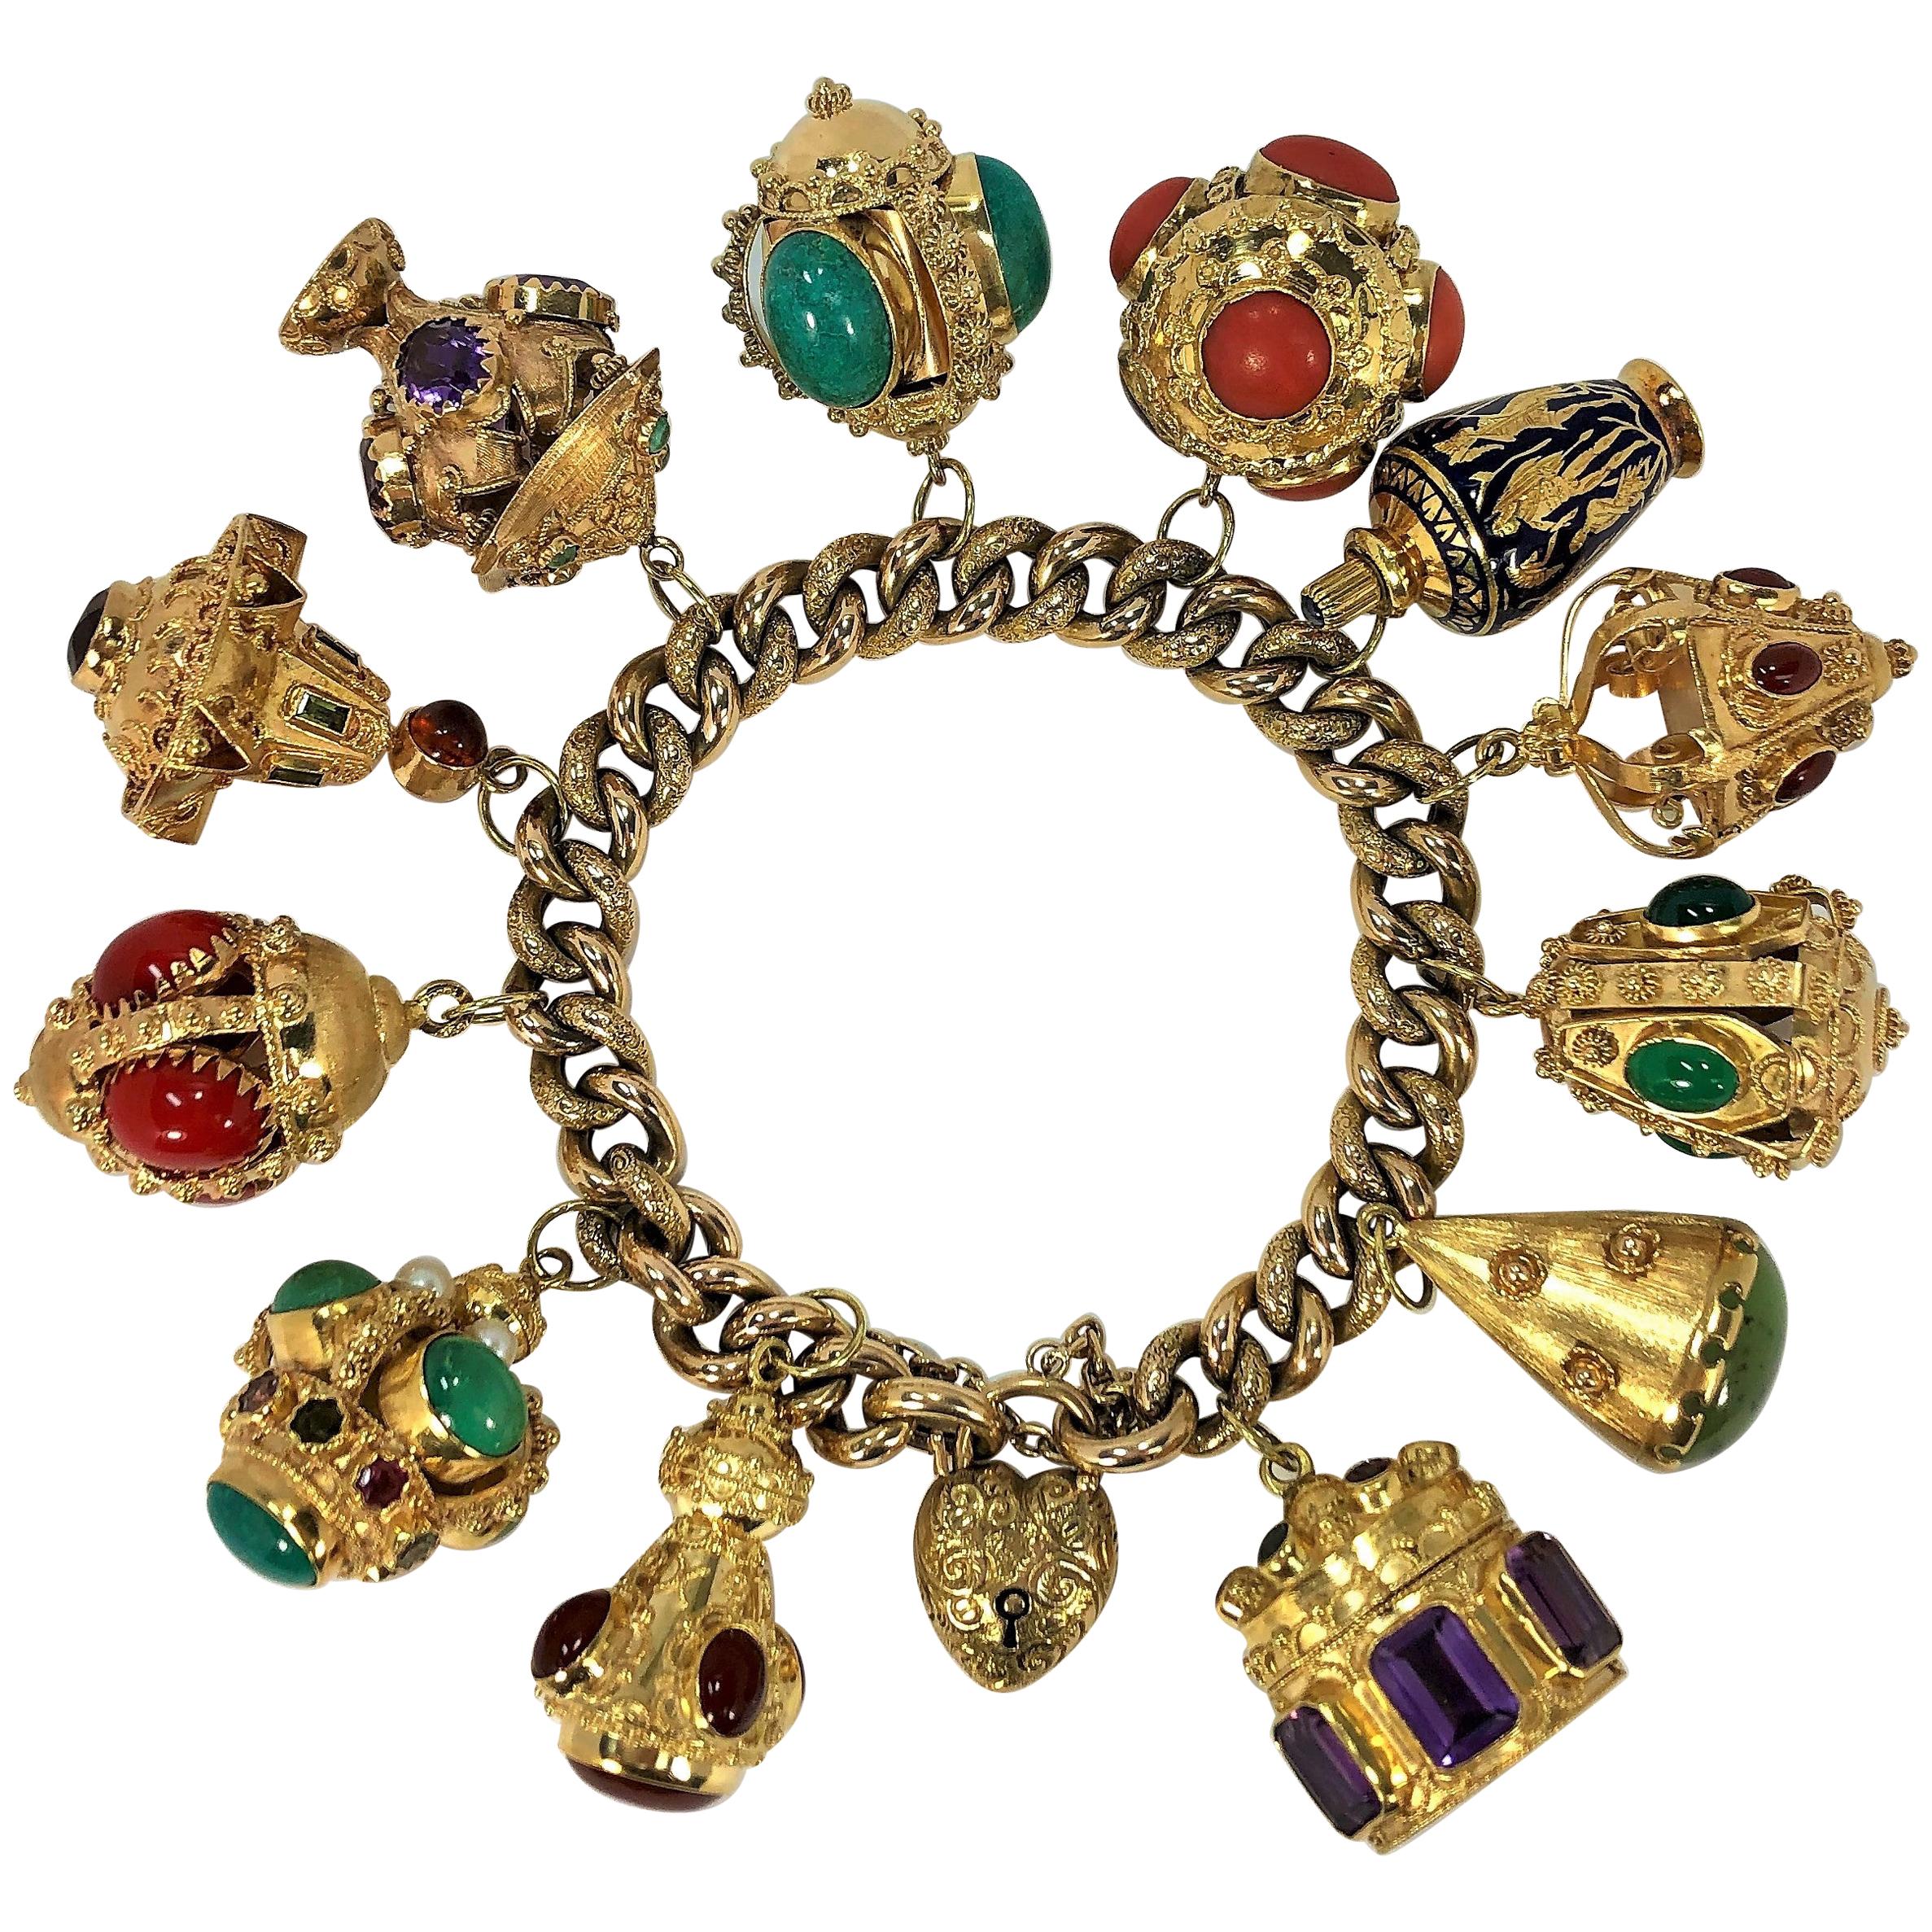 Midcentury Italian Gold Etruscan Revival Charm Bracelet-12 Assorted Color Charms For Sale